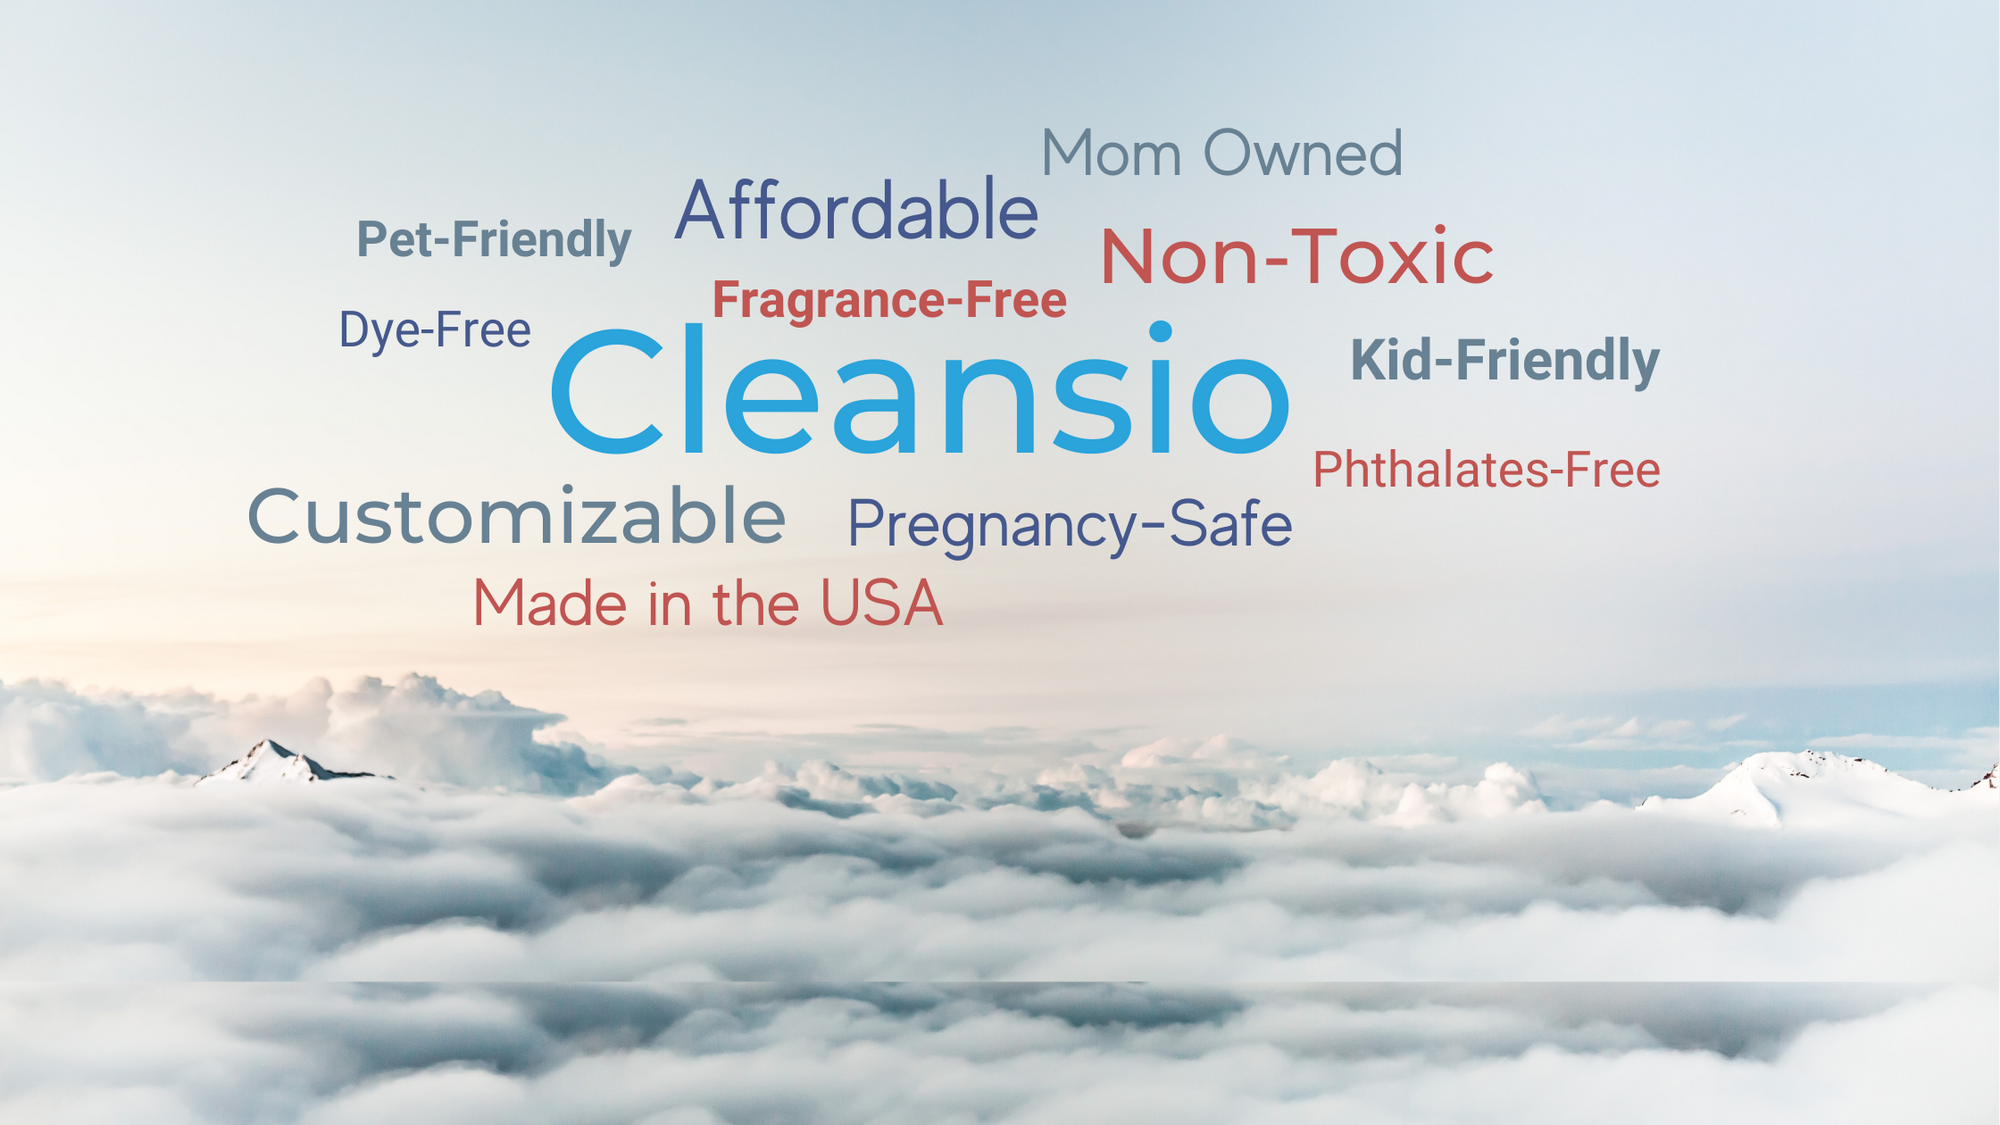 This Word Cloud shows how Cleansio's products are non-toxic, fragrance-free, dye-free, affordable, and have many other benefits.